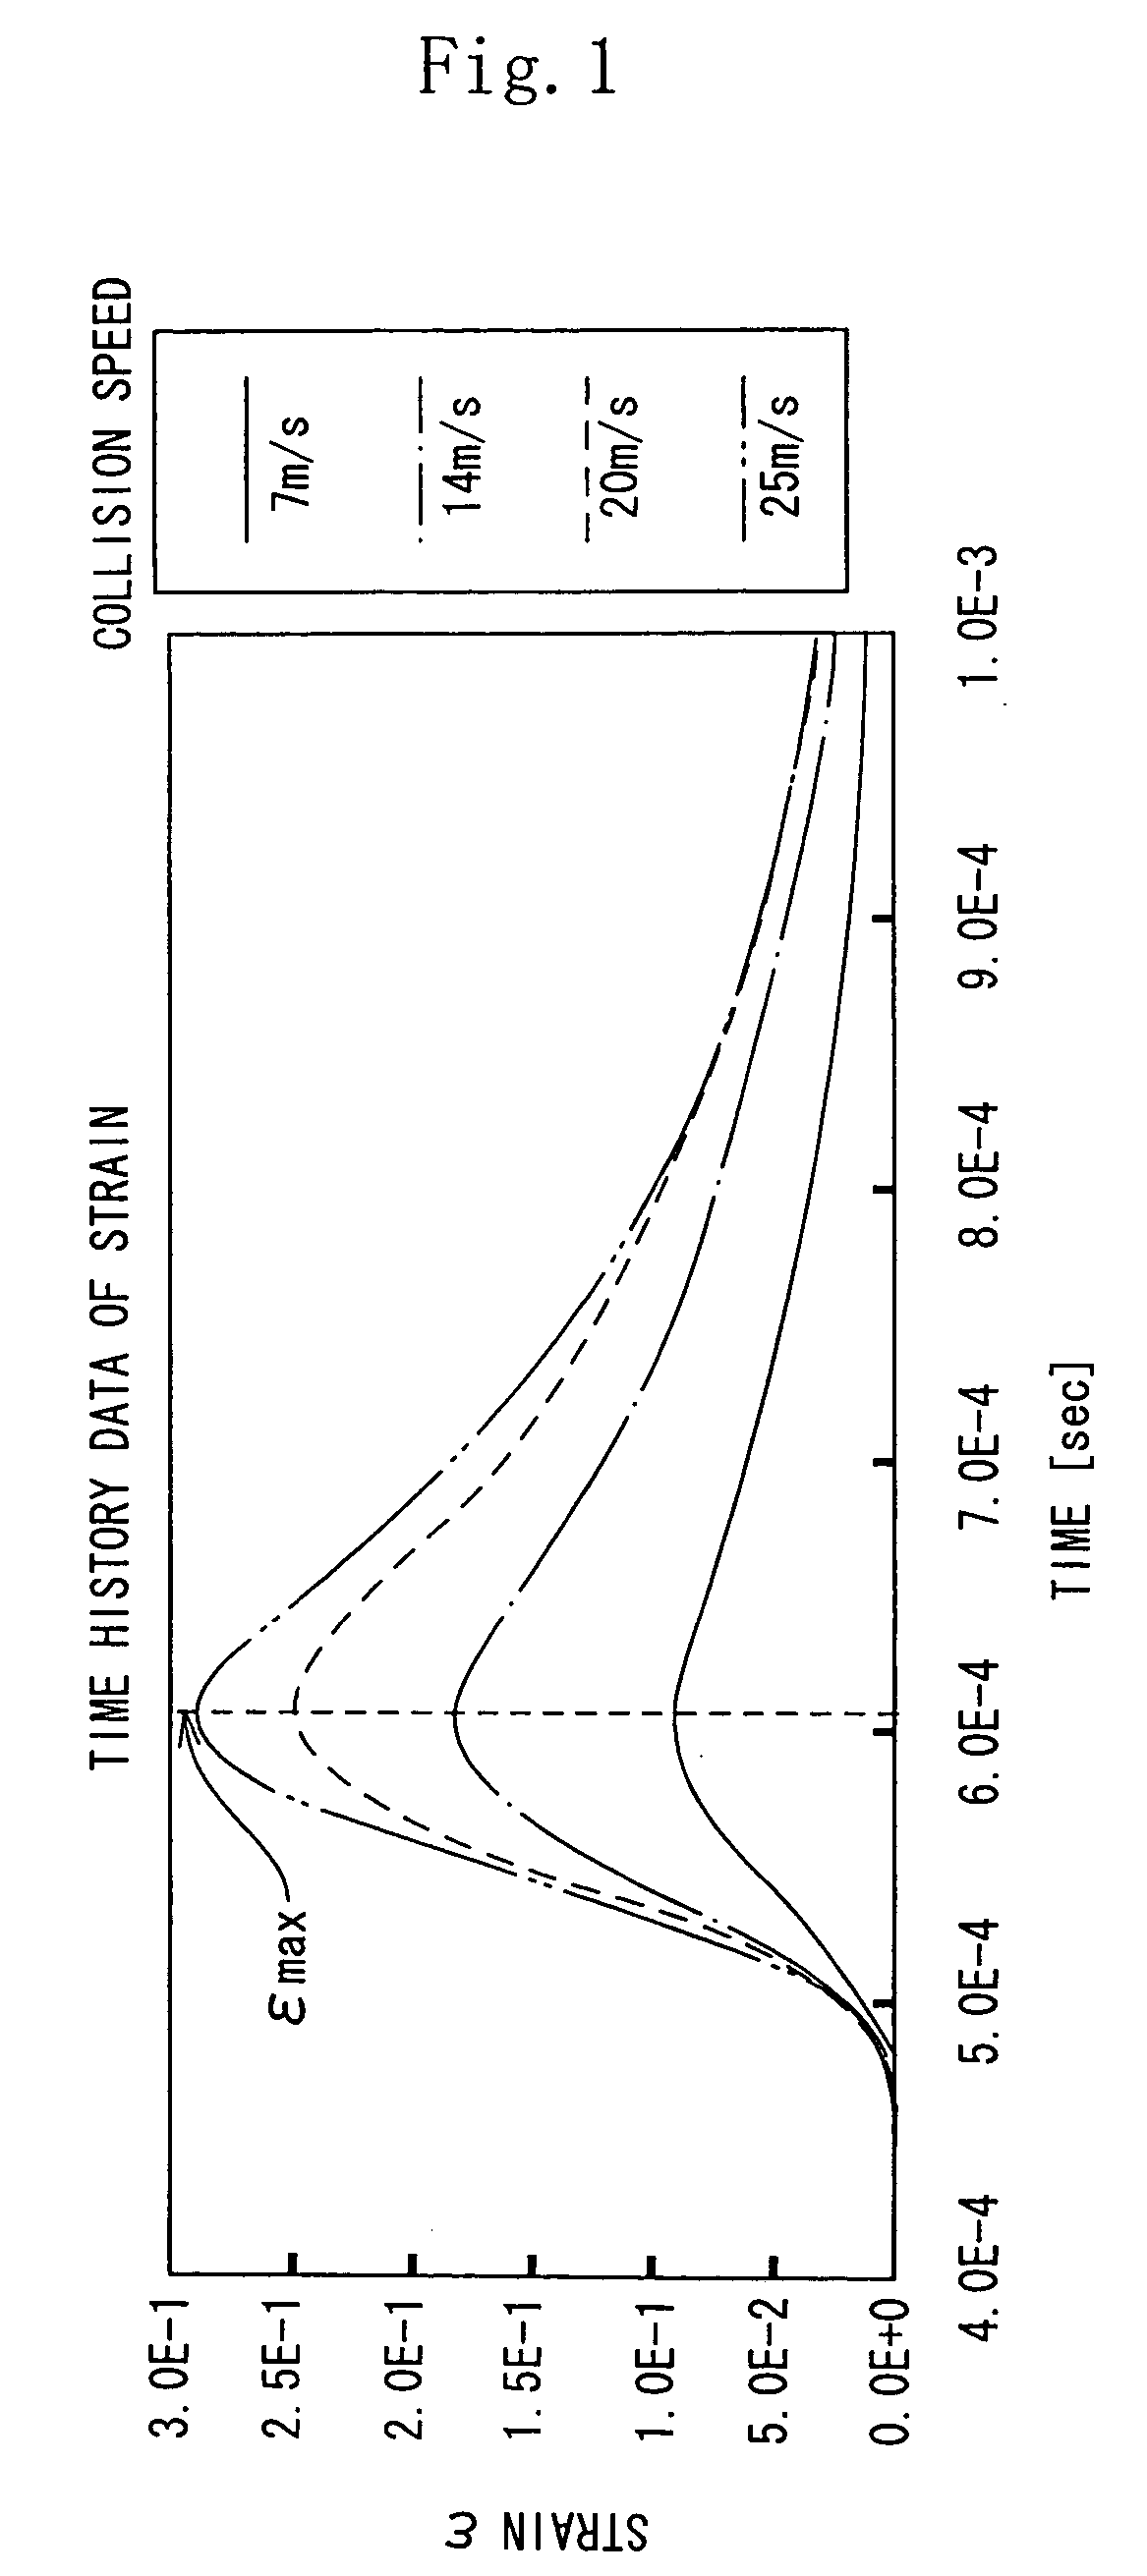 Simulation method for estimating performance of product made of viscoelastic material